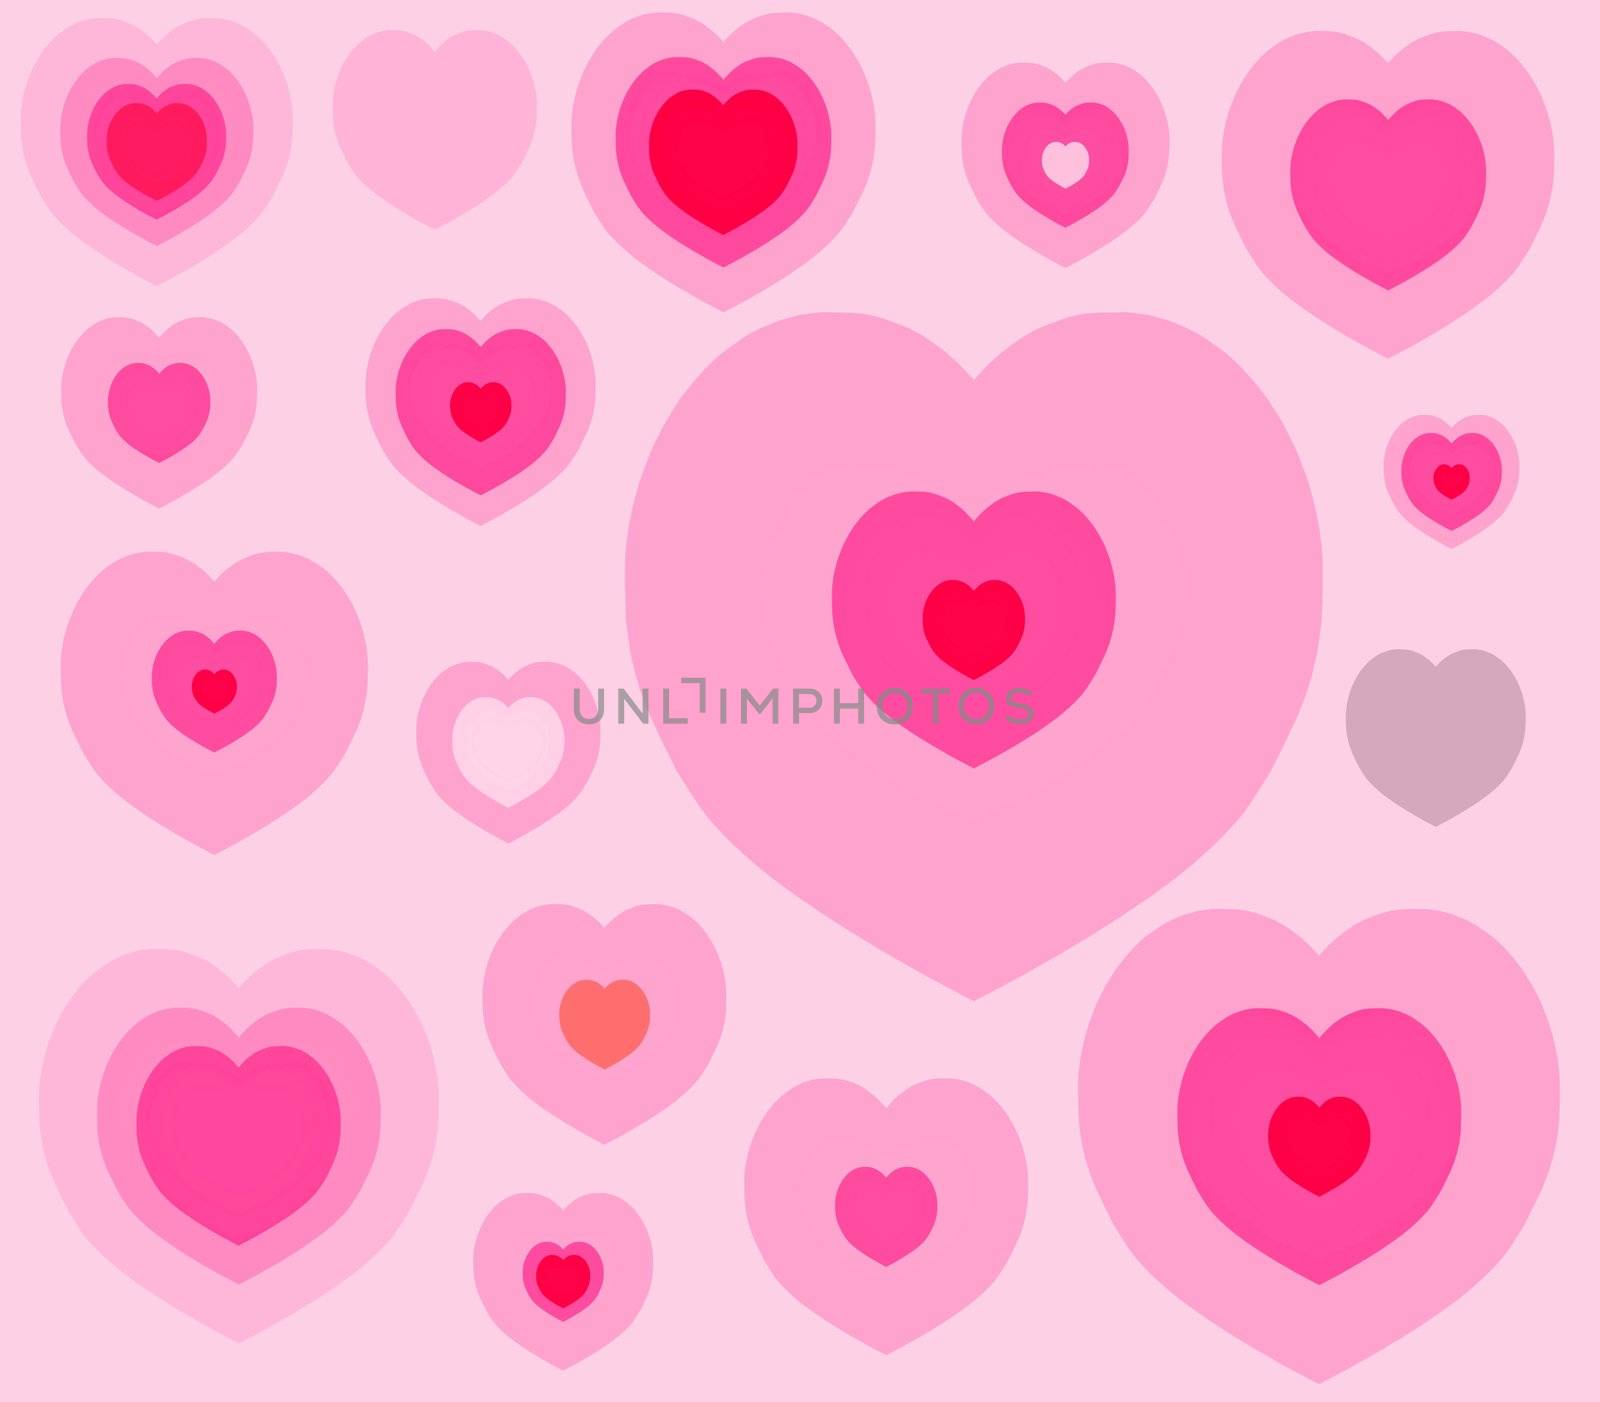 Variety of hearts over a pink background